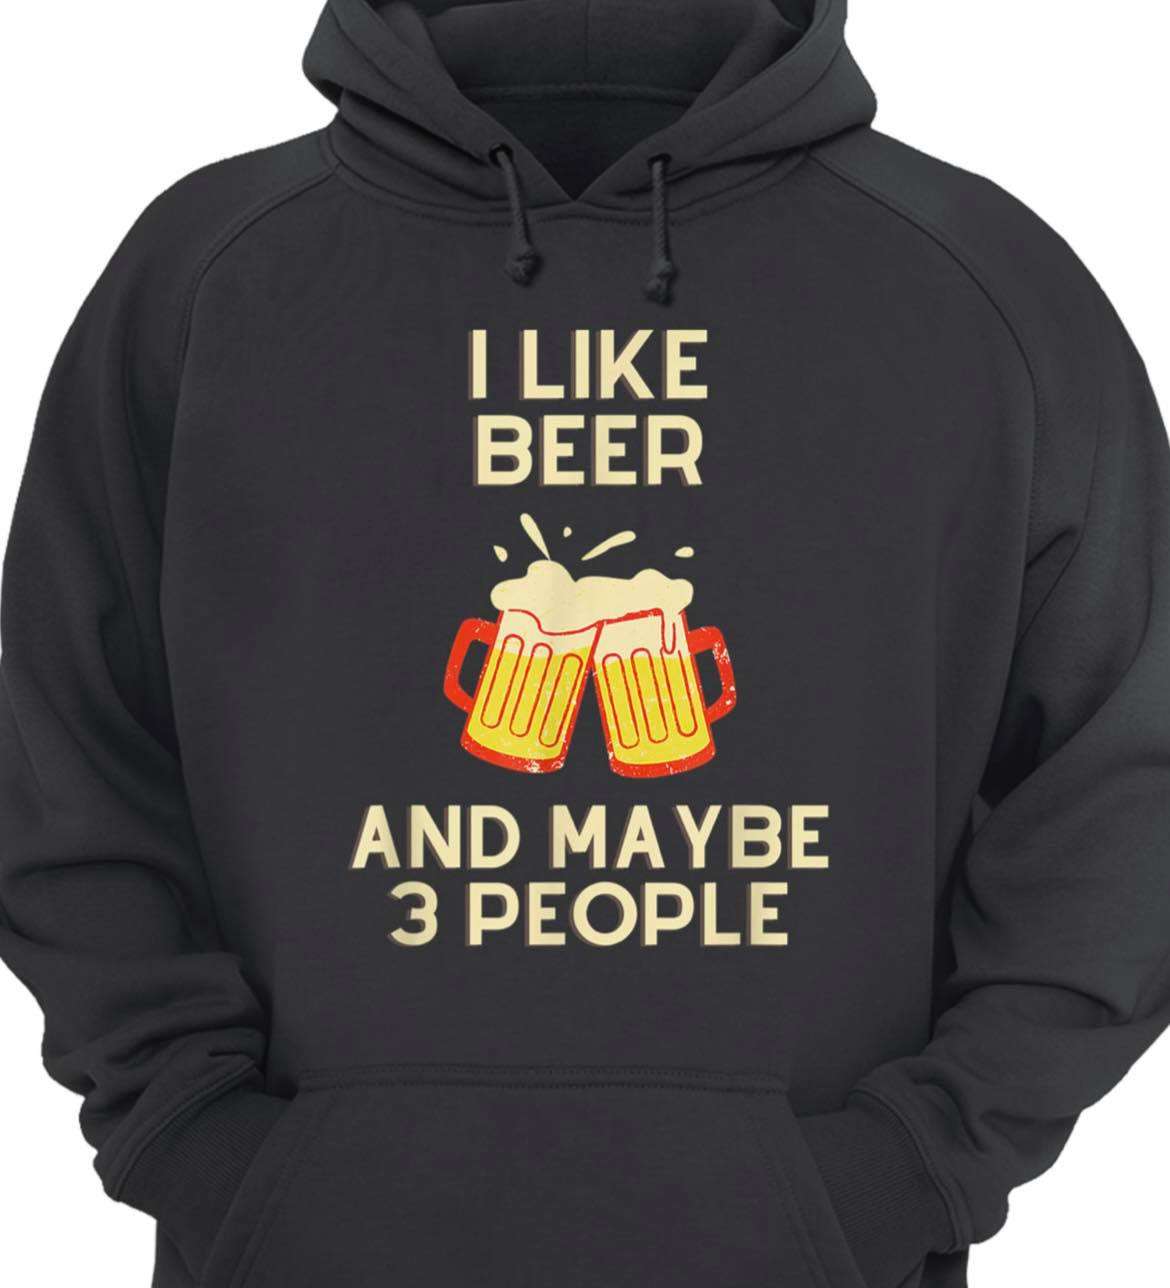 I like beer and maybe 3 people - Gift for beer lover, cheer with beer